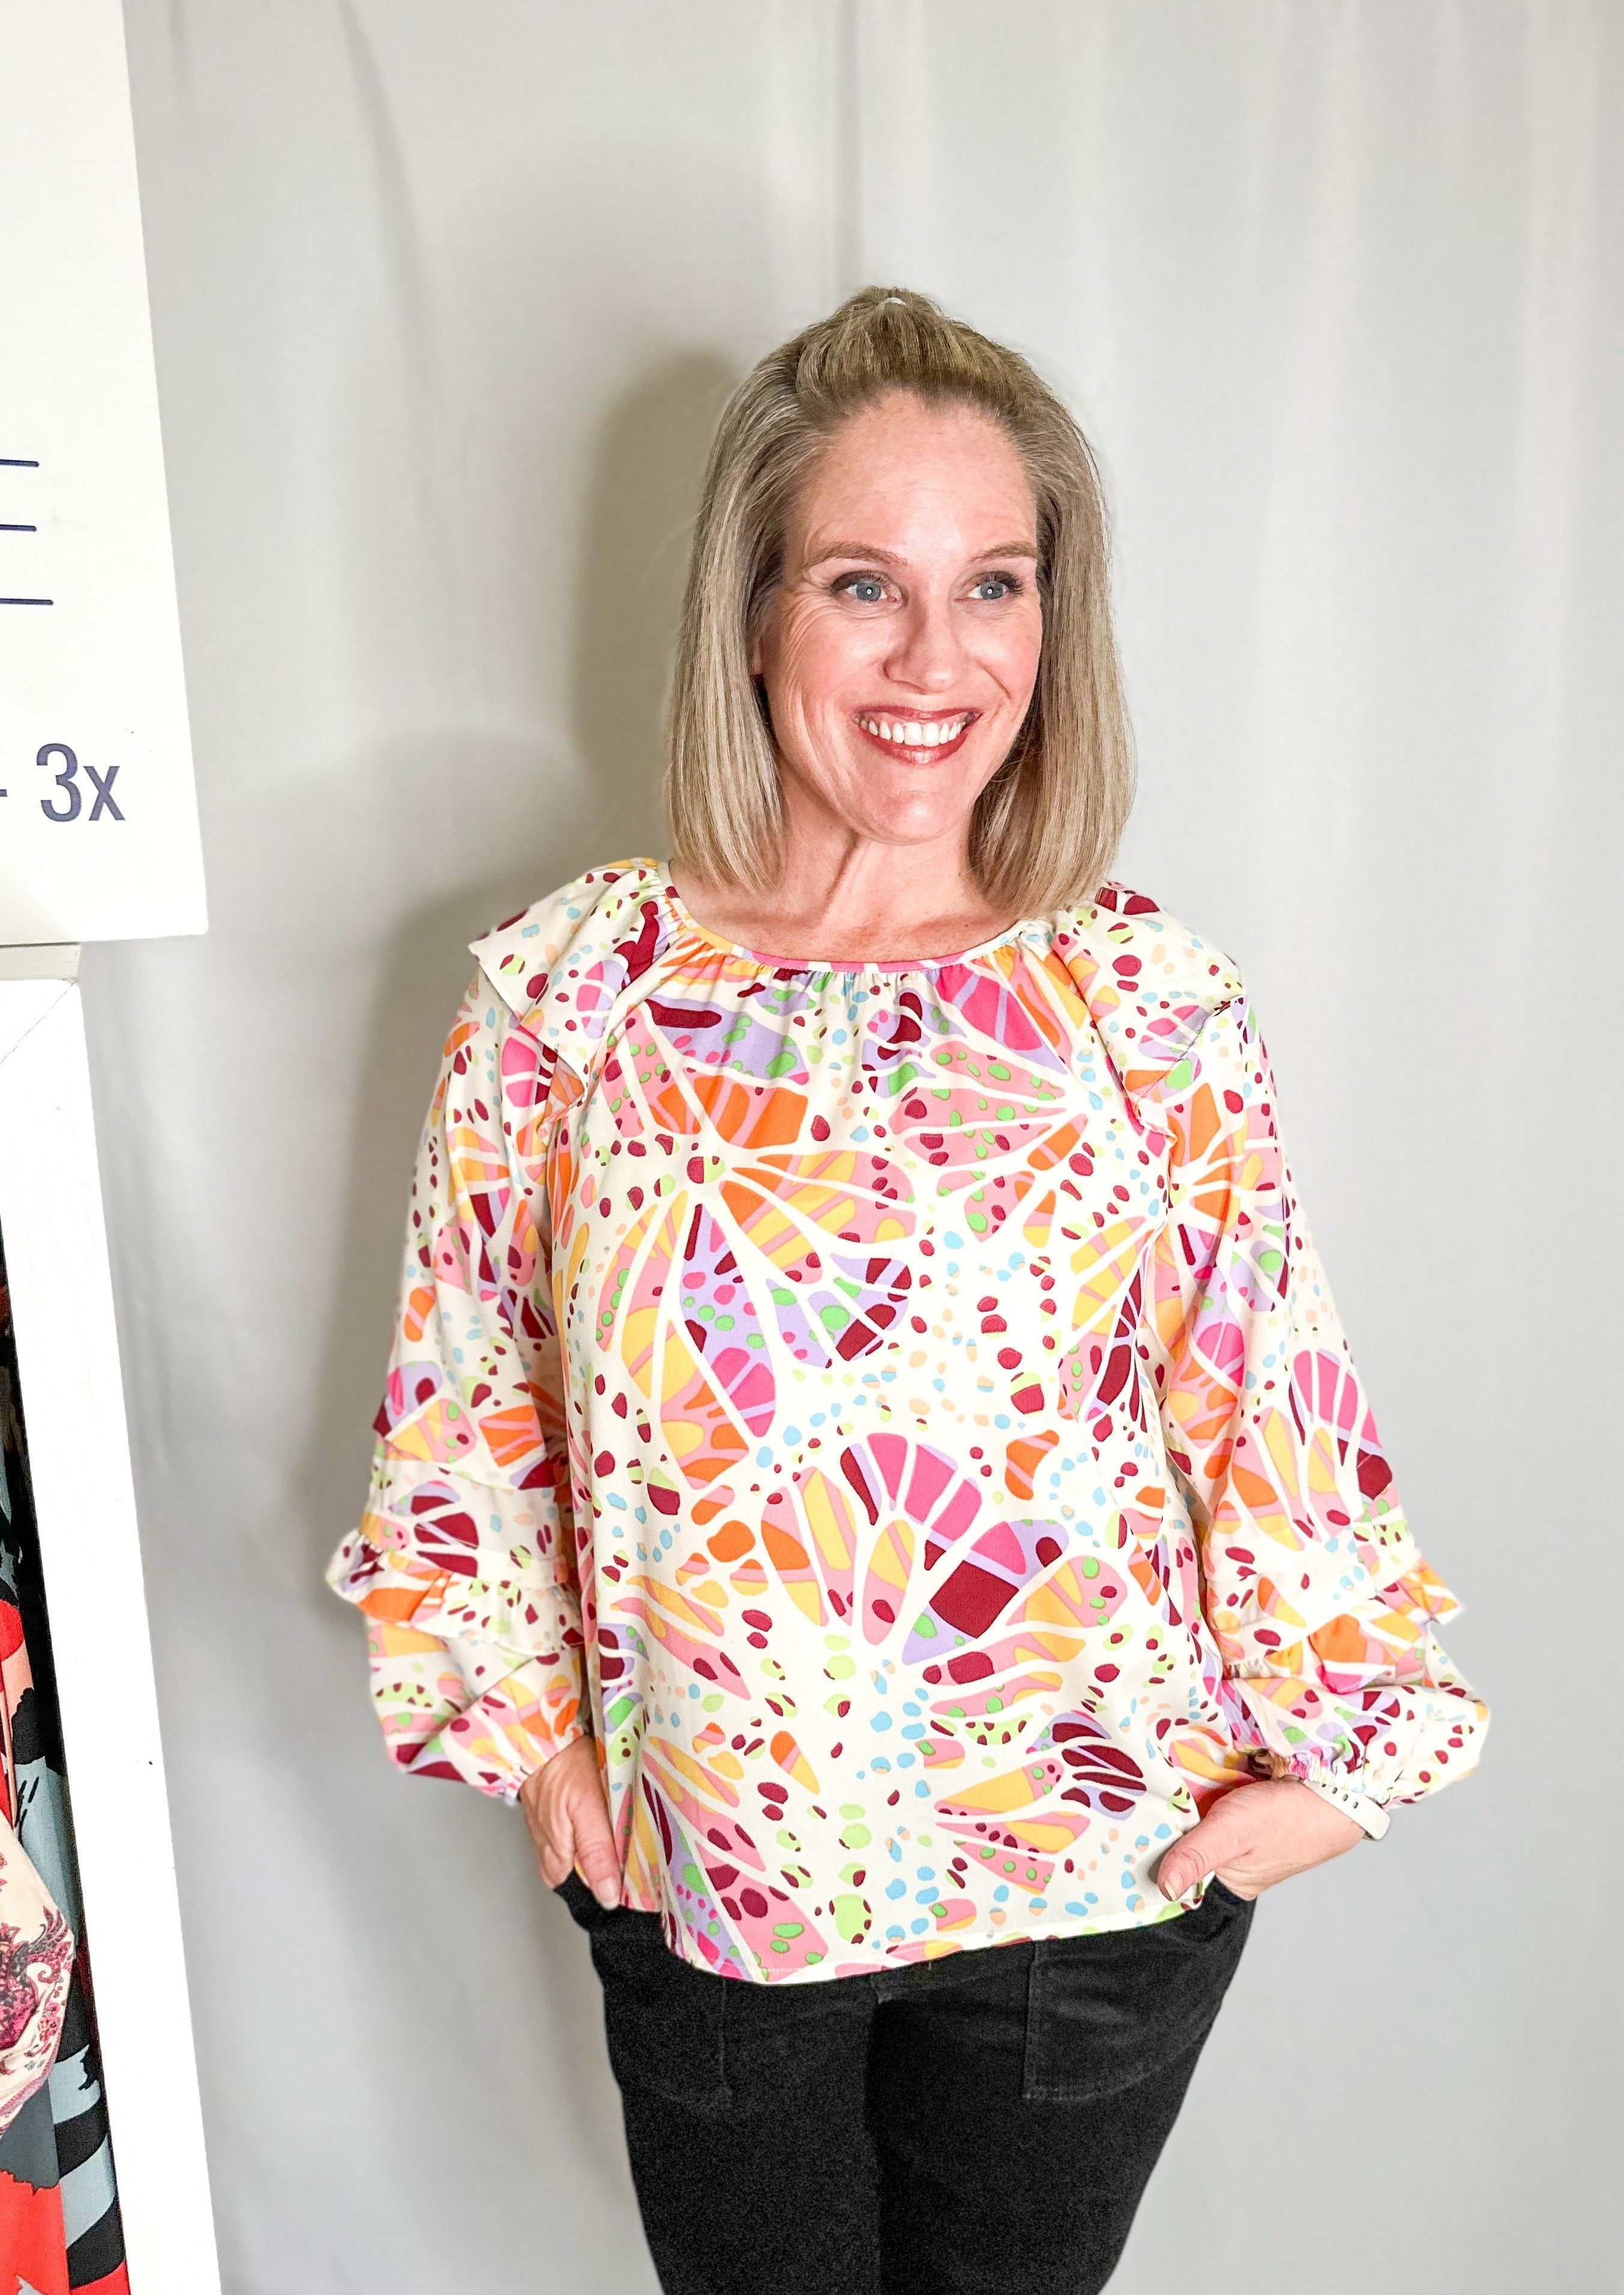 White long sleeve blouse with ruffle detail at the top of the sleeve near the shoulder and another small ruffle 3/4 down the sleeve. It has a higher neckline and multicolored abstract print all over.